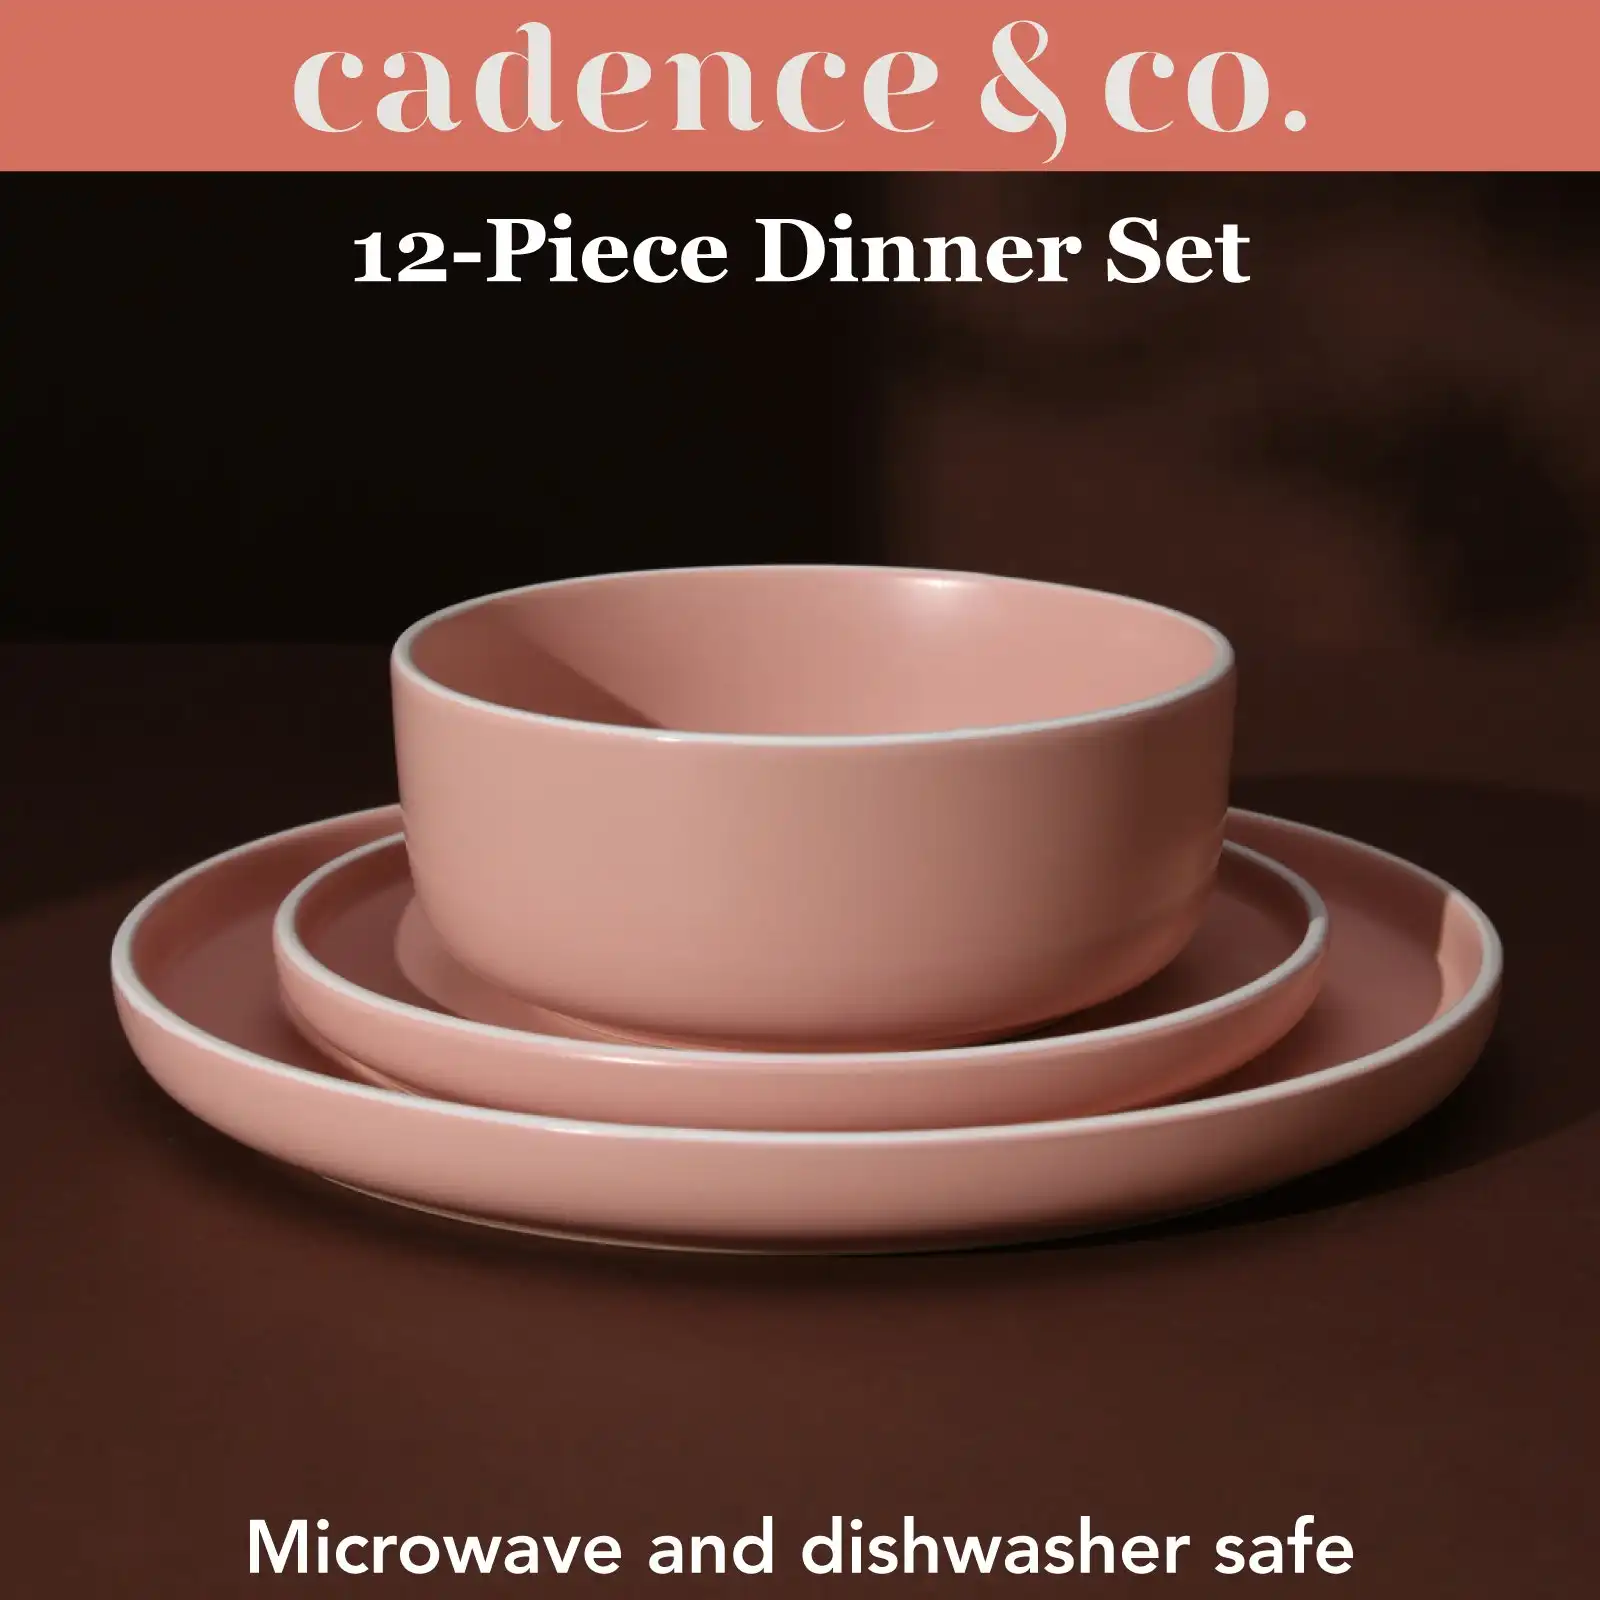 Cadence & Co. Muse 12-Piece Dinner Set Matte Glaze Pink Clay/White 4 person